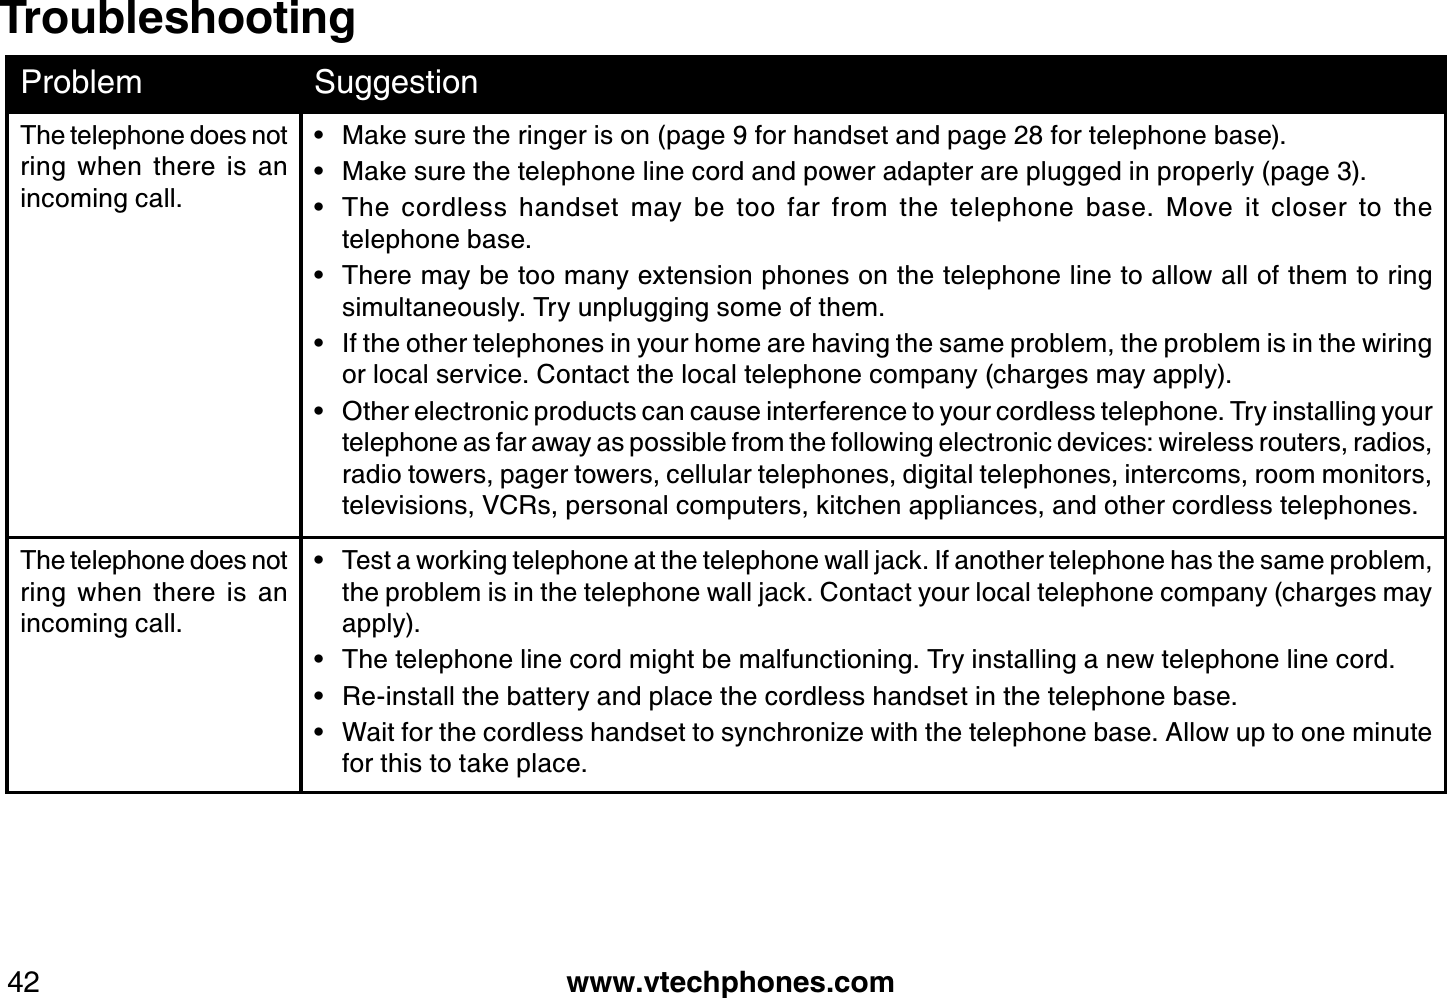 www.vtechphones.com42TroubleshootingProblem SuggestionThe telephone does not ring  when  there  is  an incoming call.Make sure the ringer is on (page 9 for handset and page 28 for telephone base).Make sure the telephone line cord and power adapter are plugged in properly (page 3).The  cordless  handset  may  be  too  far  from  the  telephone  base.  Move  it  closer  to  the                  telephone base.There may be too many extension phones on the telephone line to allow all of them to ring simultaneously. Try unplugging some of them.If the other telephones in your home are having the same problem, the problem is in the wiring or local service. Contact the local telephone company (charges may apply).Other electronic products can cause interference to your cordless telephone. Try installing your telephone as far away as possible from the following electronic devices: wireless routers, radios, radio towers, pager towers, cellular telephones, digital telephones, intercoms, room monitors, televisions, VCRs, personal computers, kitchen appliances, and other cordless telephones.••••••The telephone does not ring  when  there  is  an incoming call.Test a working telephone at the telephone wall jack. If another telephone has the same problem, the problem is in the telephone wall jack. Contact your local telephone company (charges may apply).The telephone line cord might be malfunctioning. Try installing a new telephone line cord.Re-install the battery and place the cordless handset in the telephone base.Wait for the cordless handset to synchronize with the telephone base. Allow up to one minute for this to take place.••••